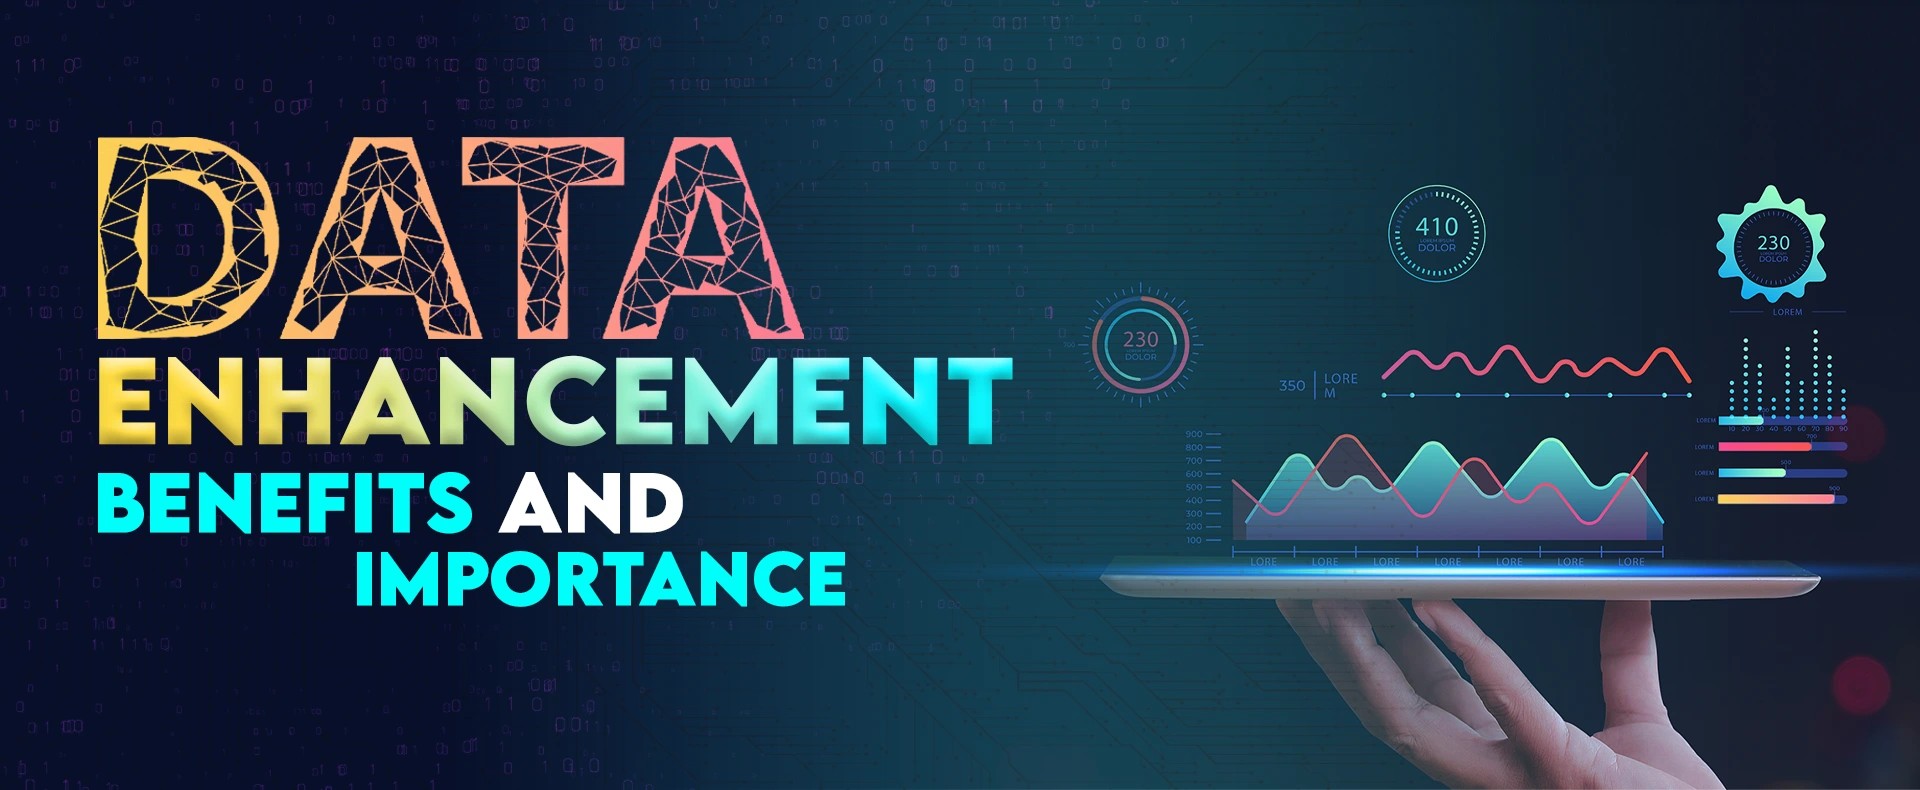 Data Enhancement Benefits and Importance Feature Image Final